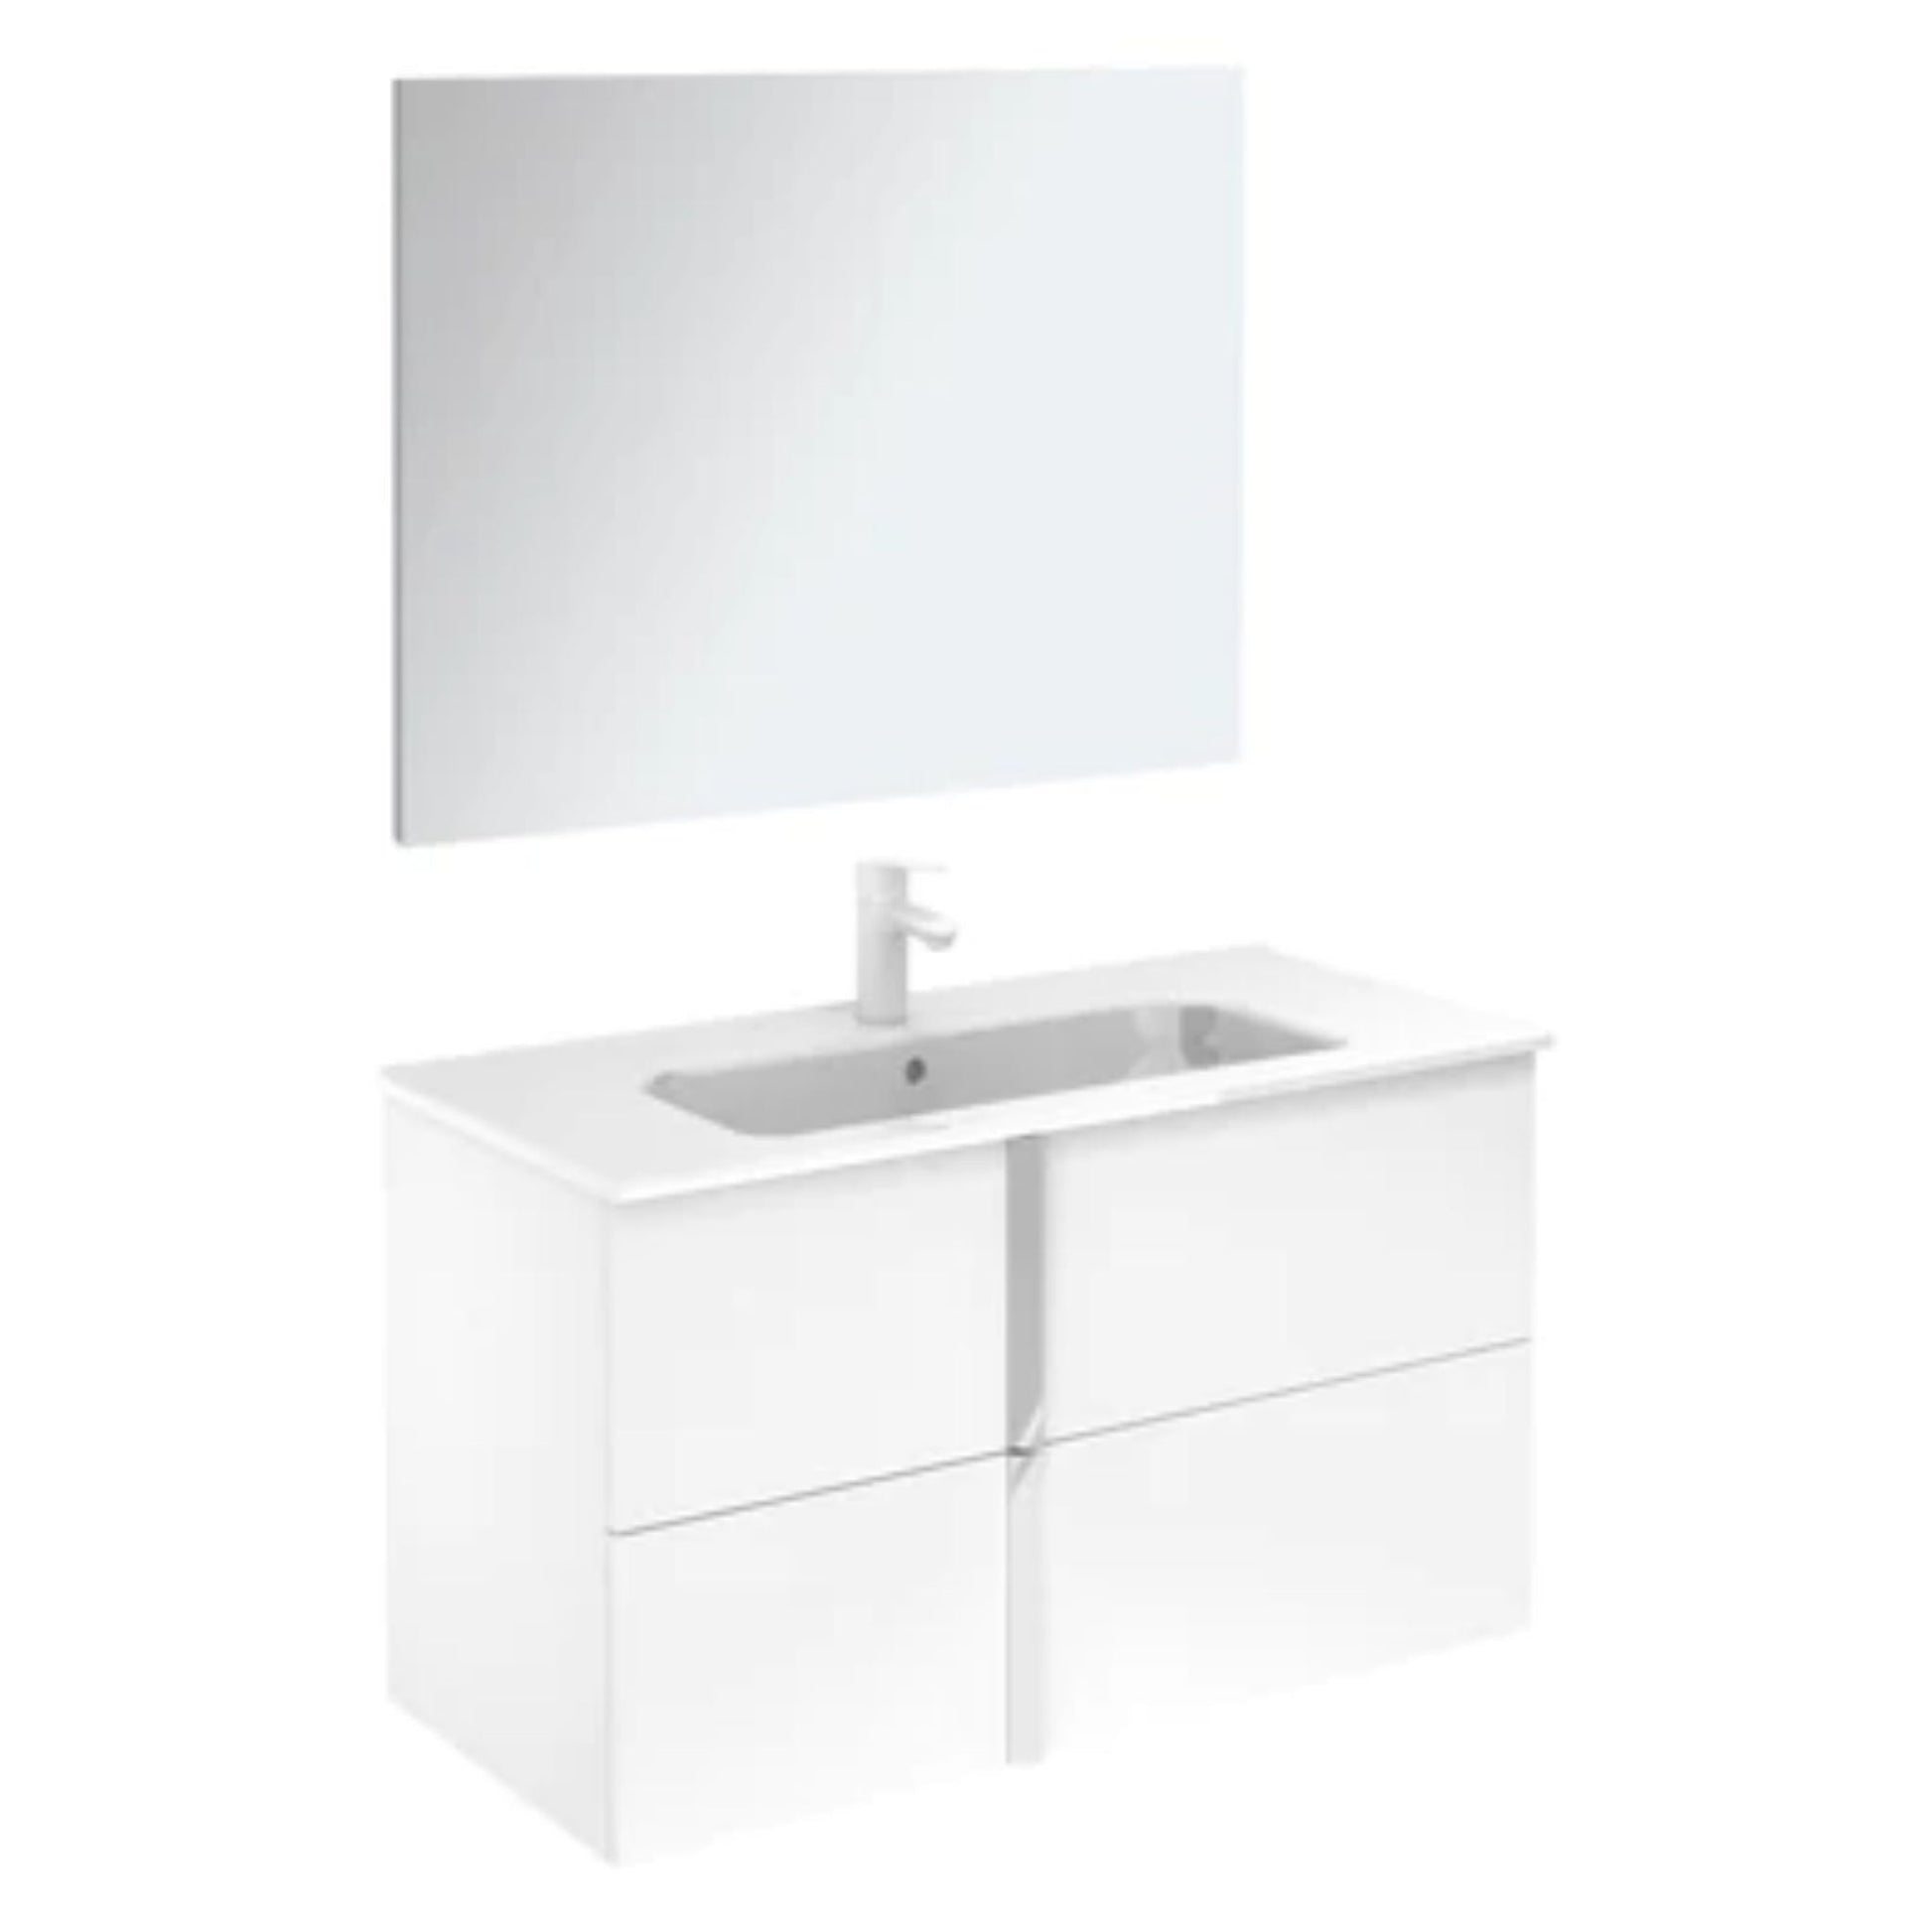 LessCare Onix+ by Royo 40" White Modern Wall-Mount 2 Drawers Vanity Cabinet